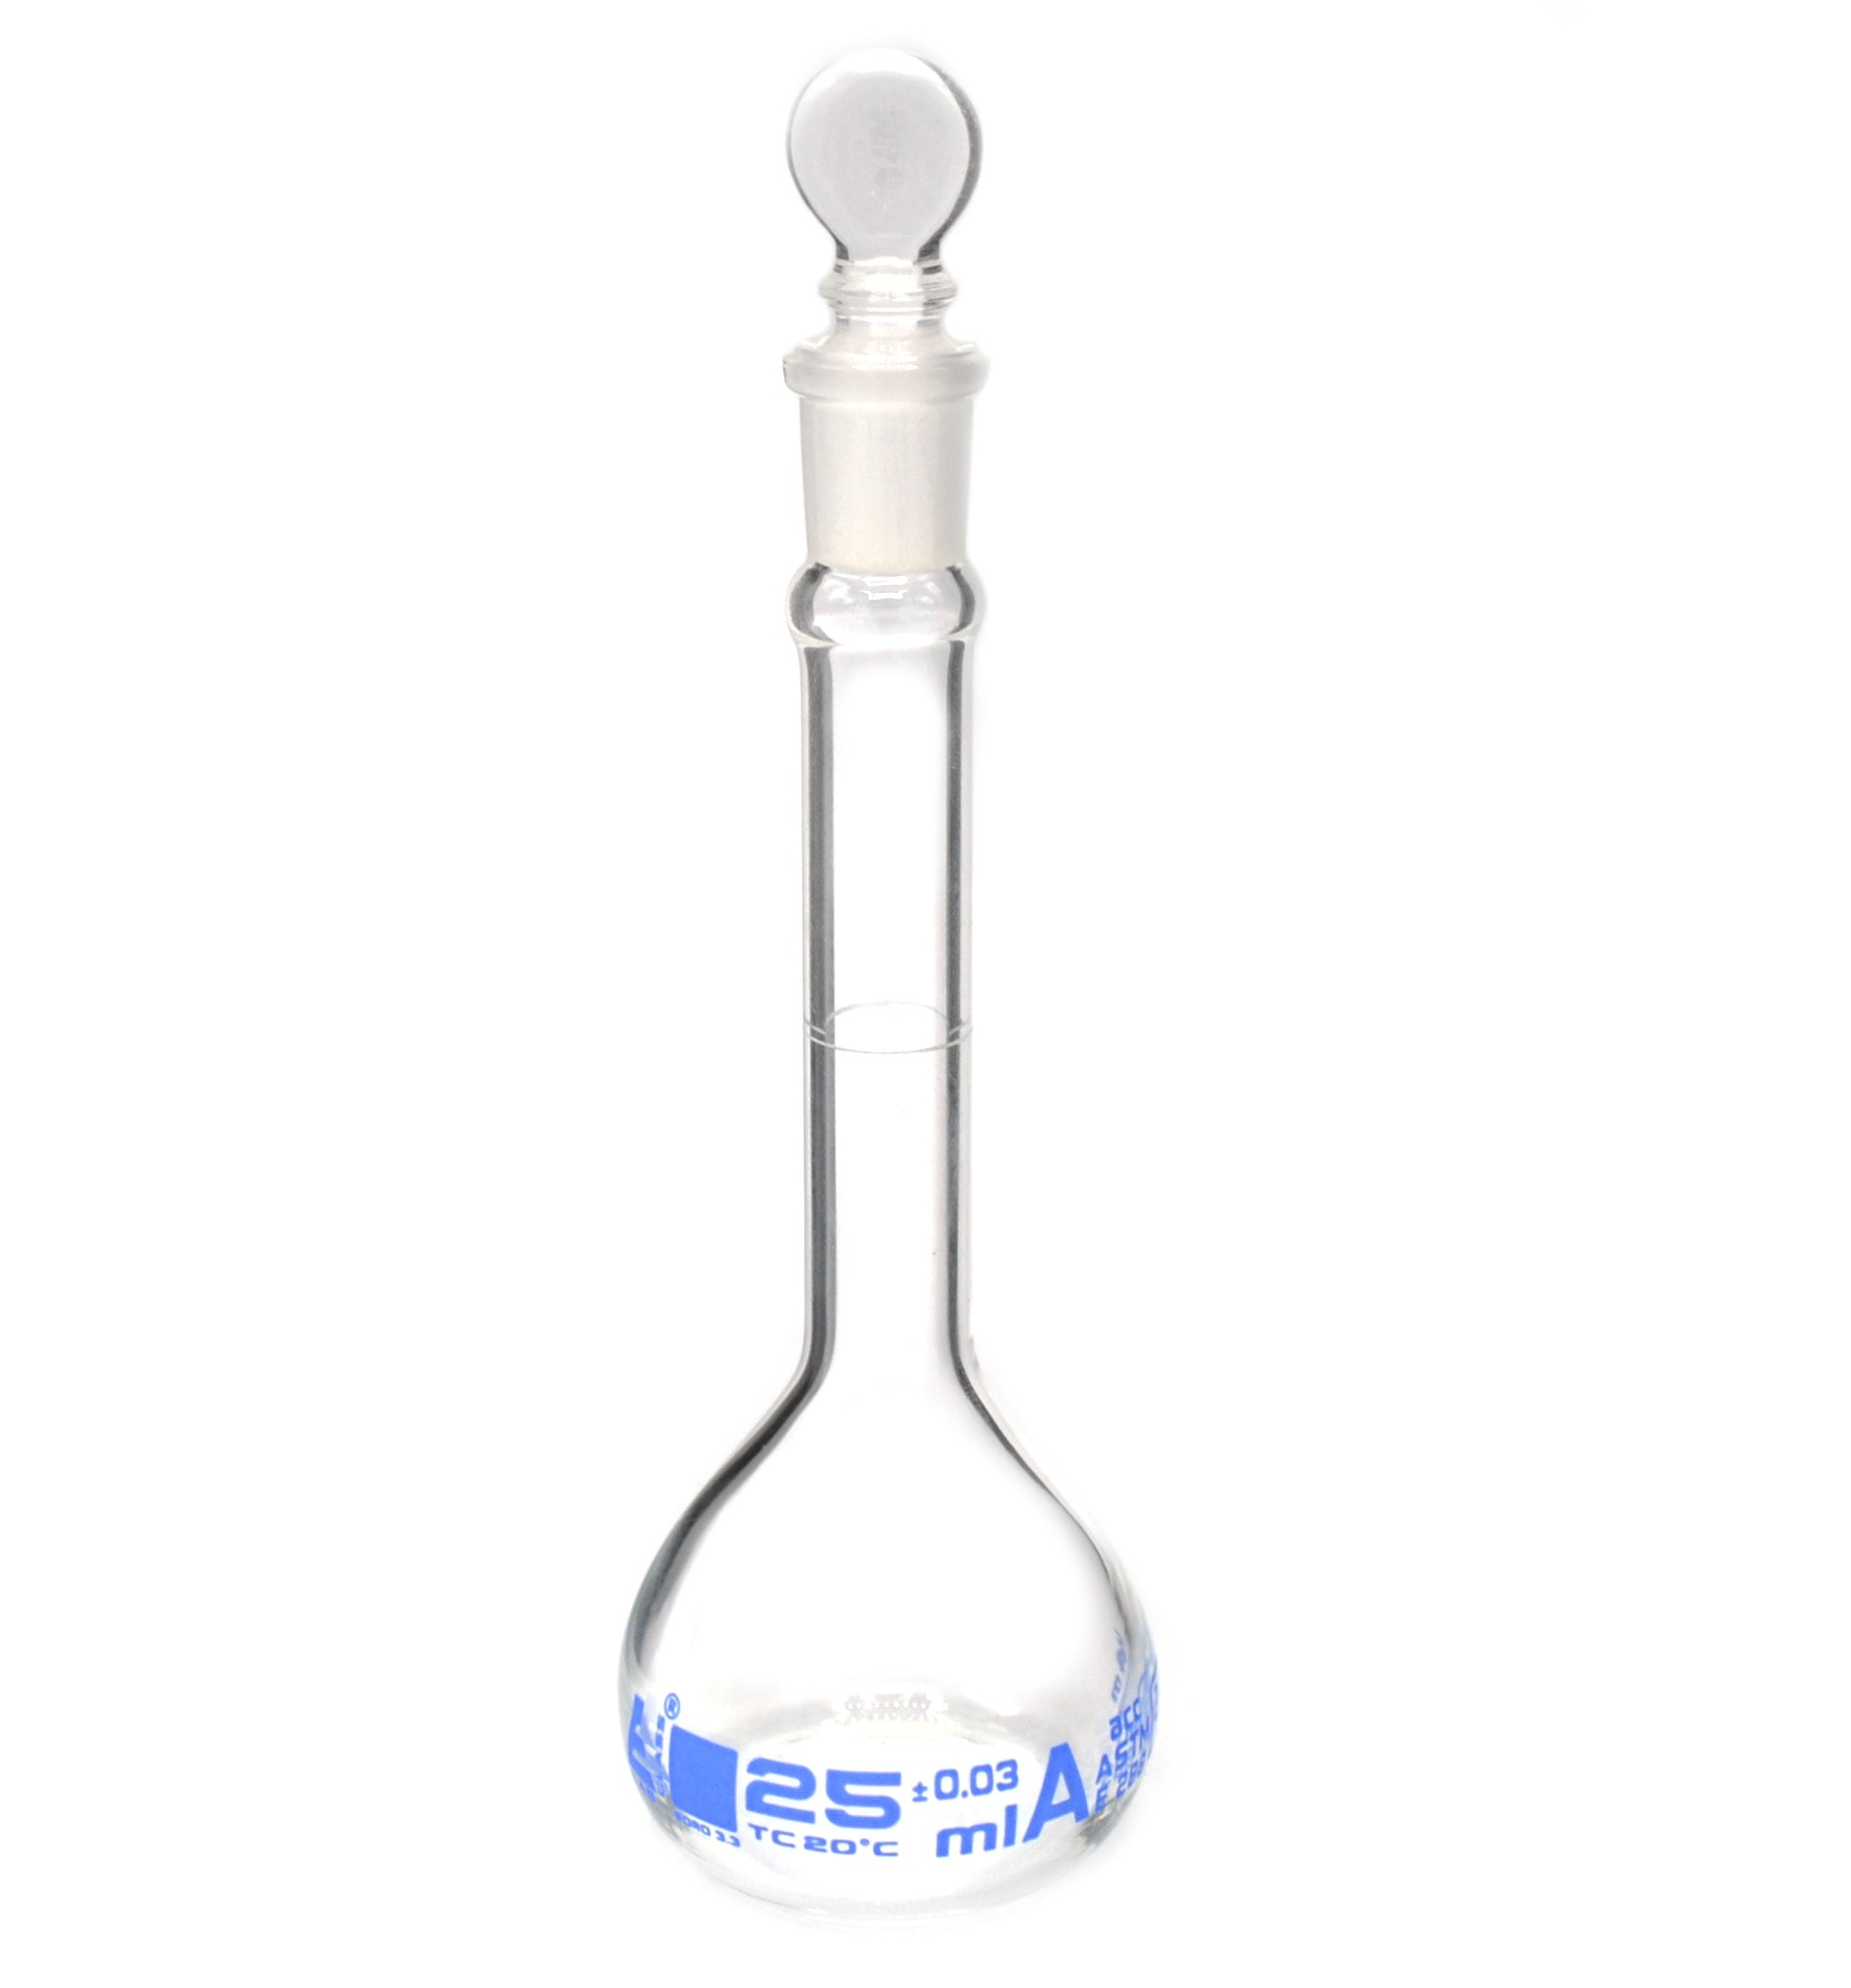 Borosilicate Glass ASTM Volumetric Flask with Glass Stopper, 25 ml, Class A, Autoclavable